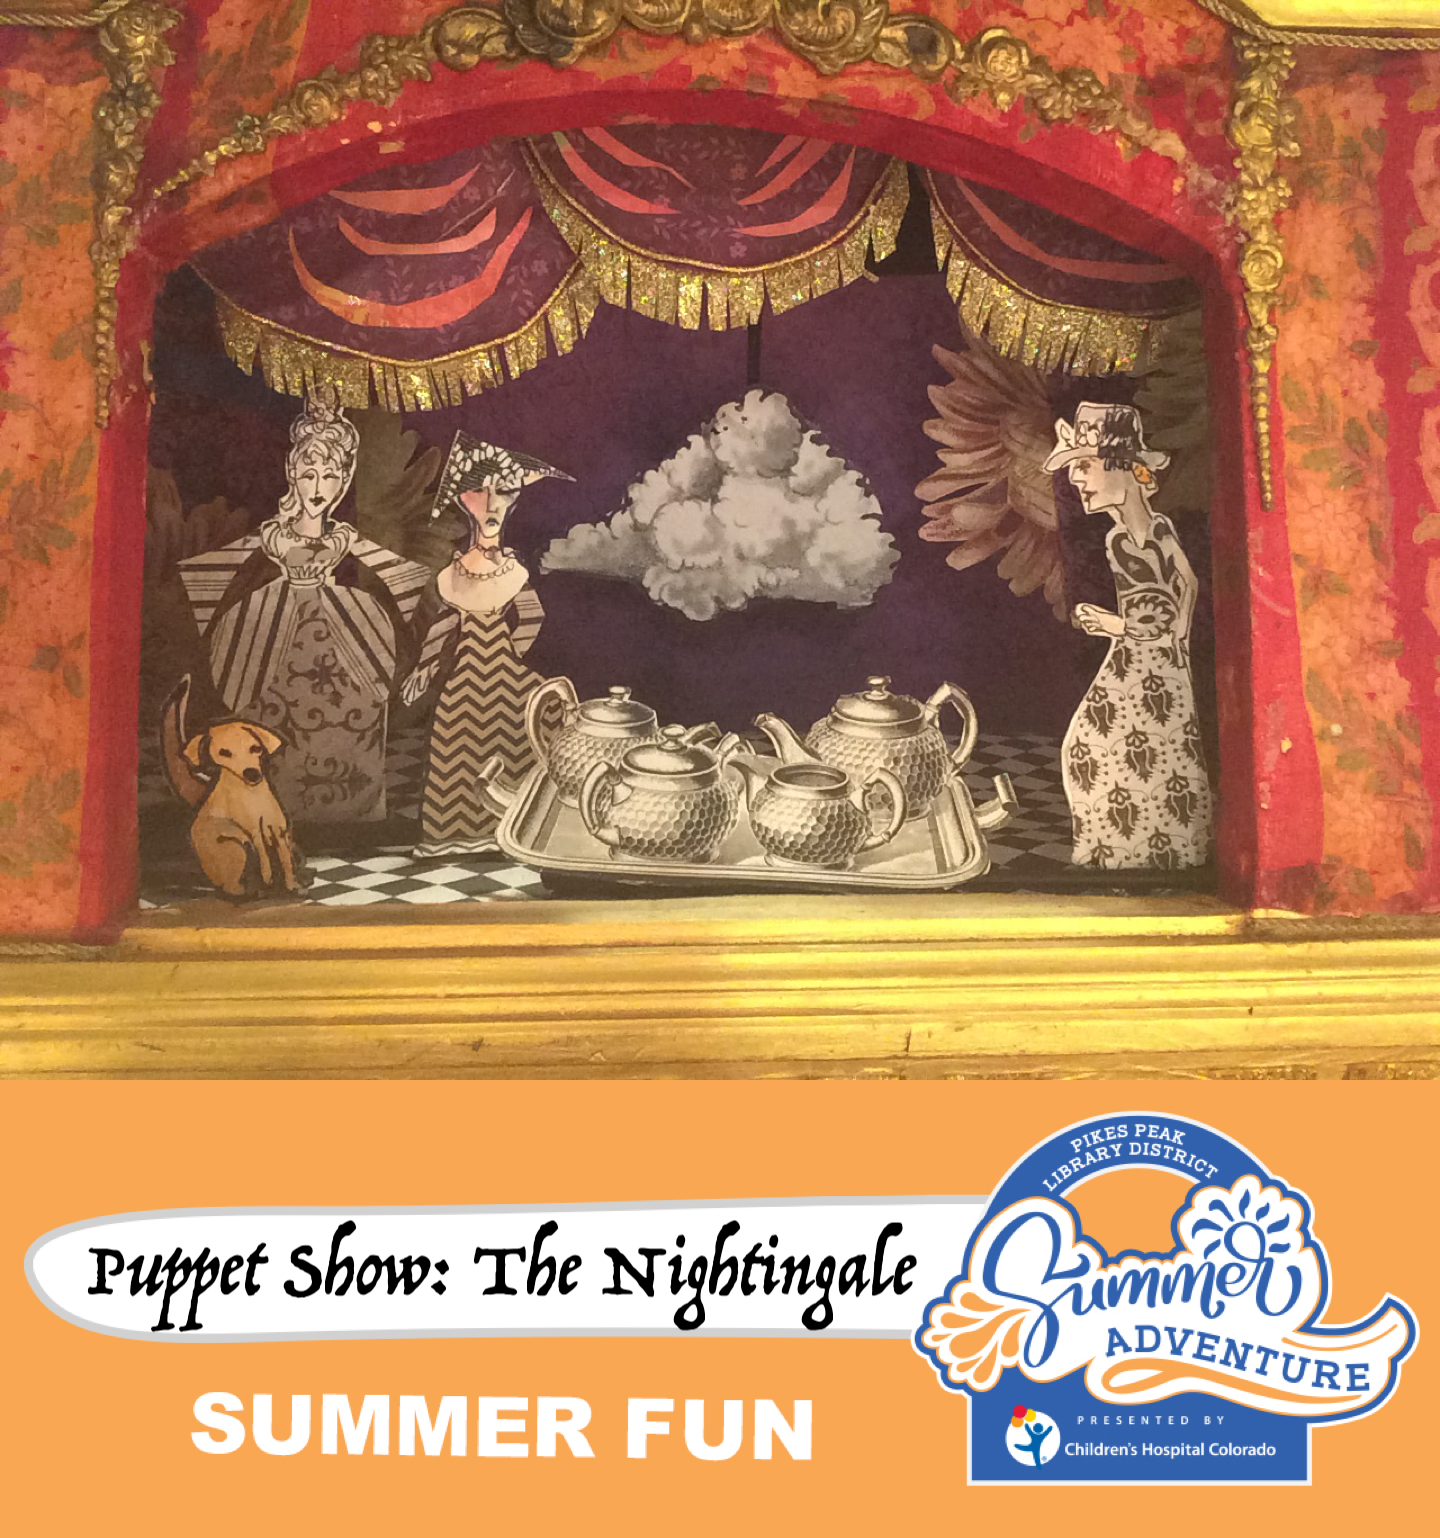 A puppet show: The Nightingale 